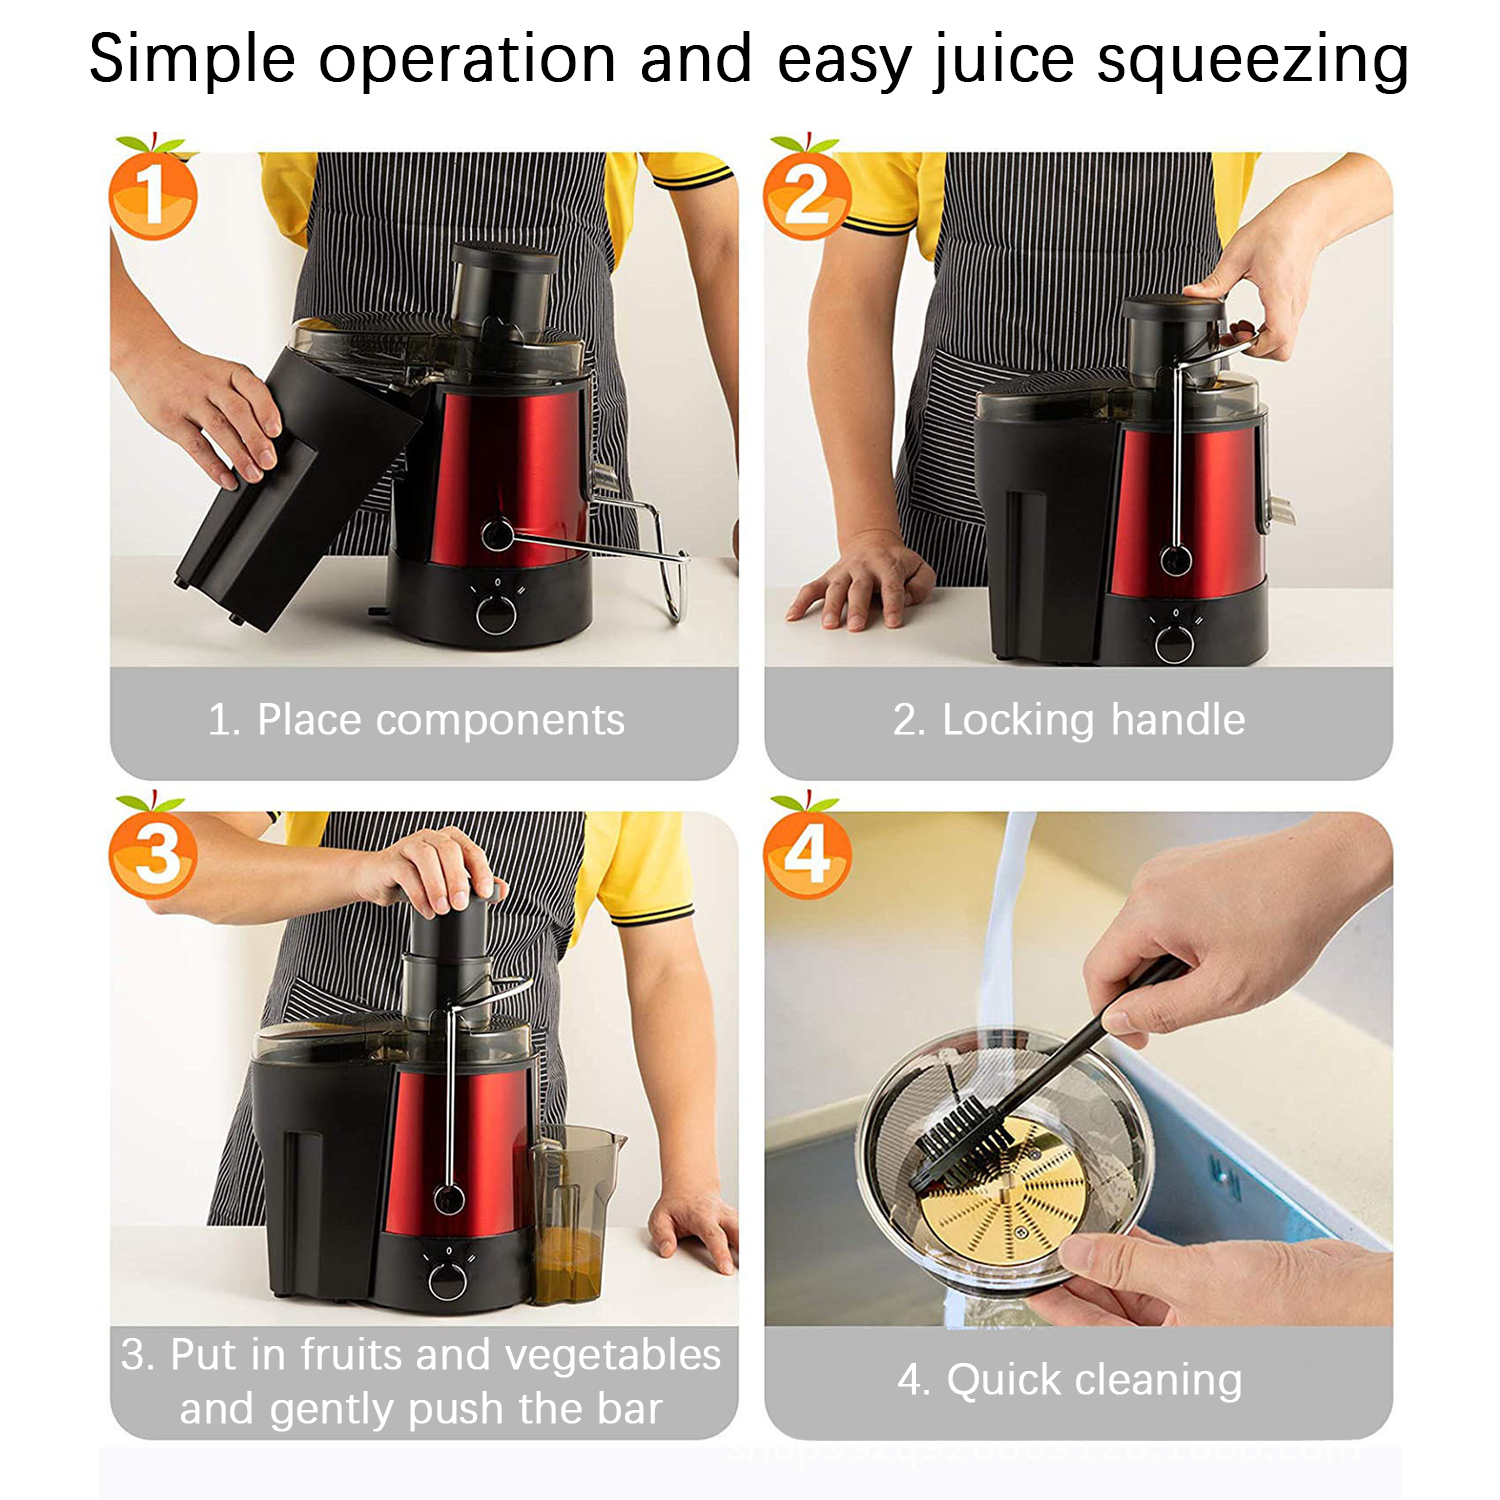 Simple operation stainless steel juicer